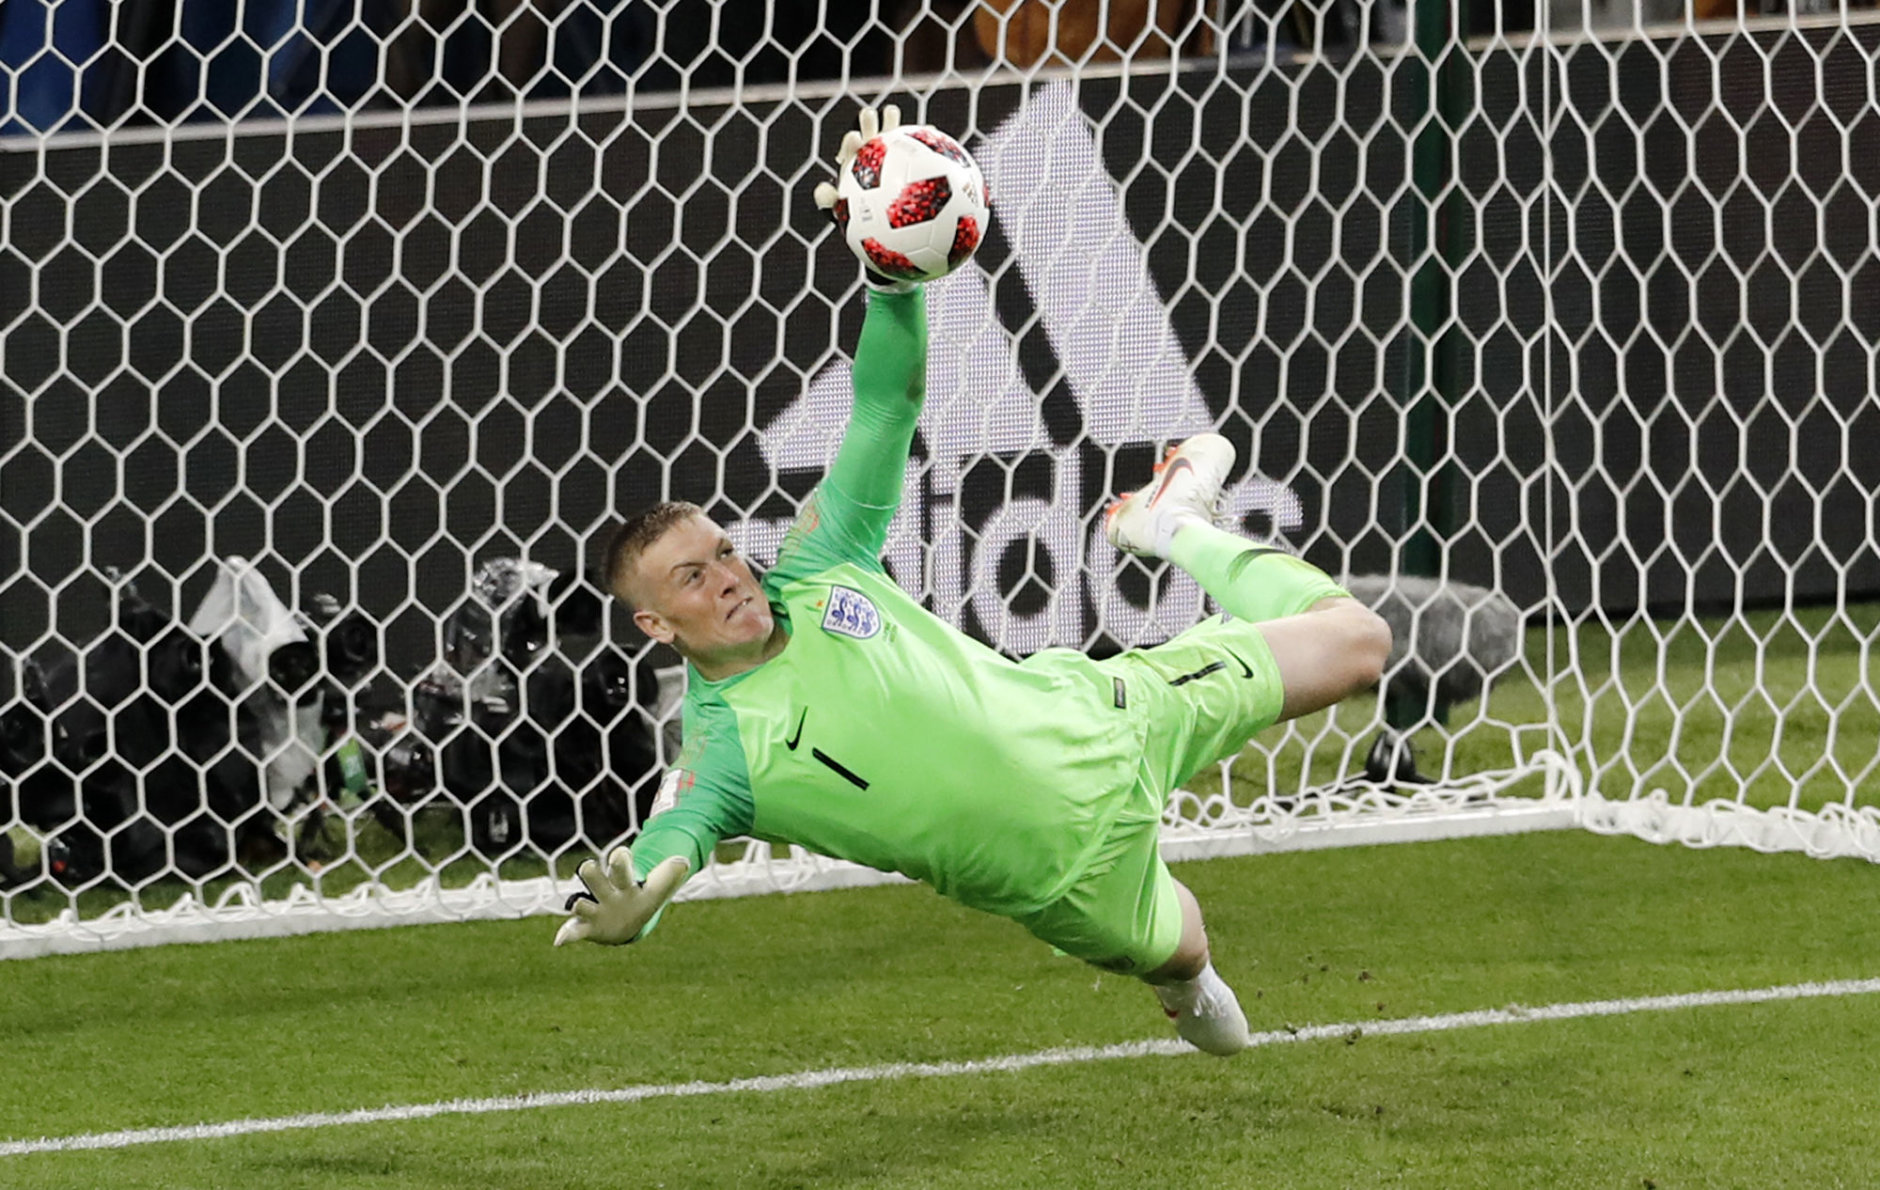 England goalkeeper Jordan Pickford stops a penalty shot from Colombia's Carlos Bacca during the round of 16 match between Colombia and England at the 2018 soccer World Cup in the Spartak Stadium, in Moscow, Russia, Tuesday, July 3, 2018. (AP Photo/Antonio Calanni)